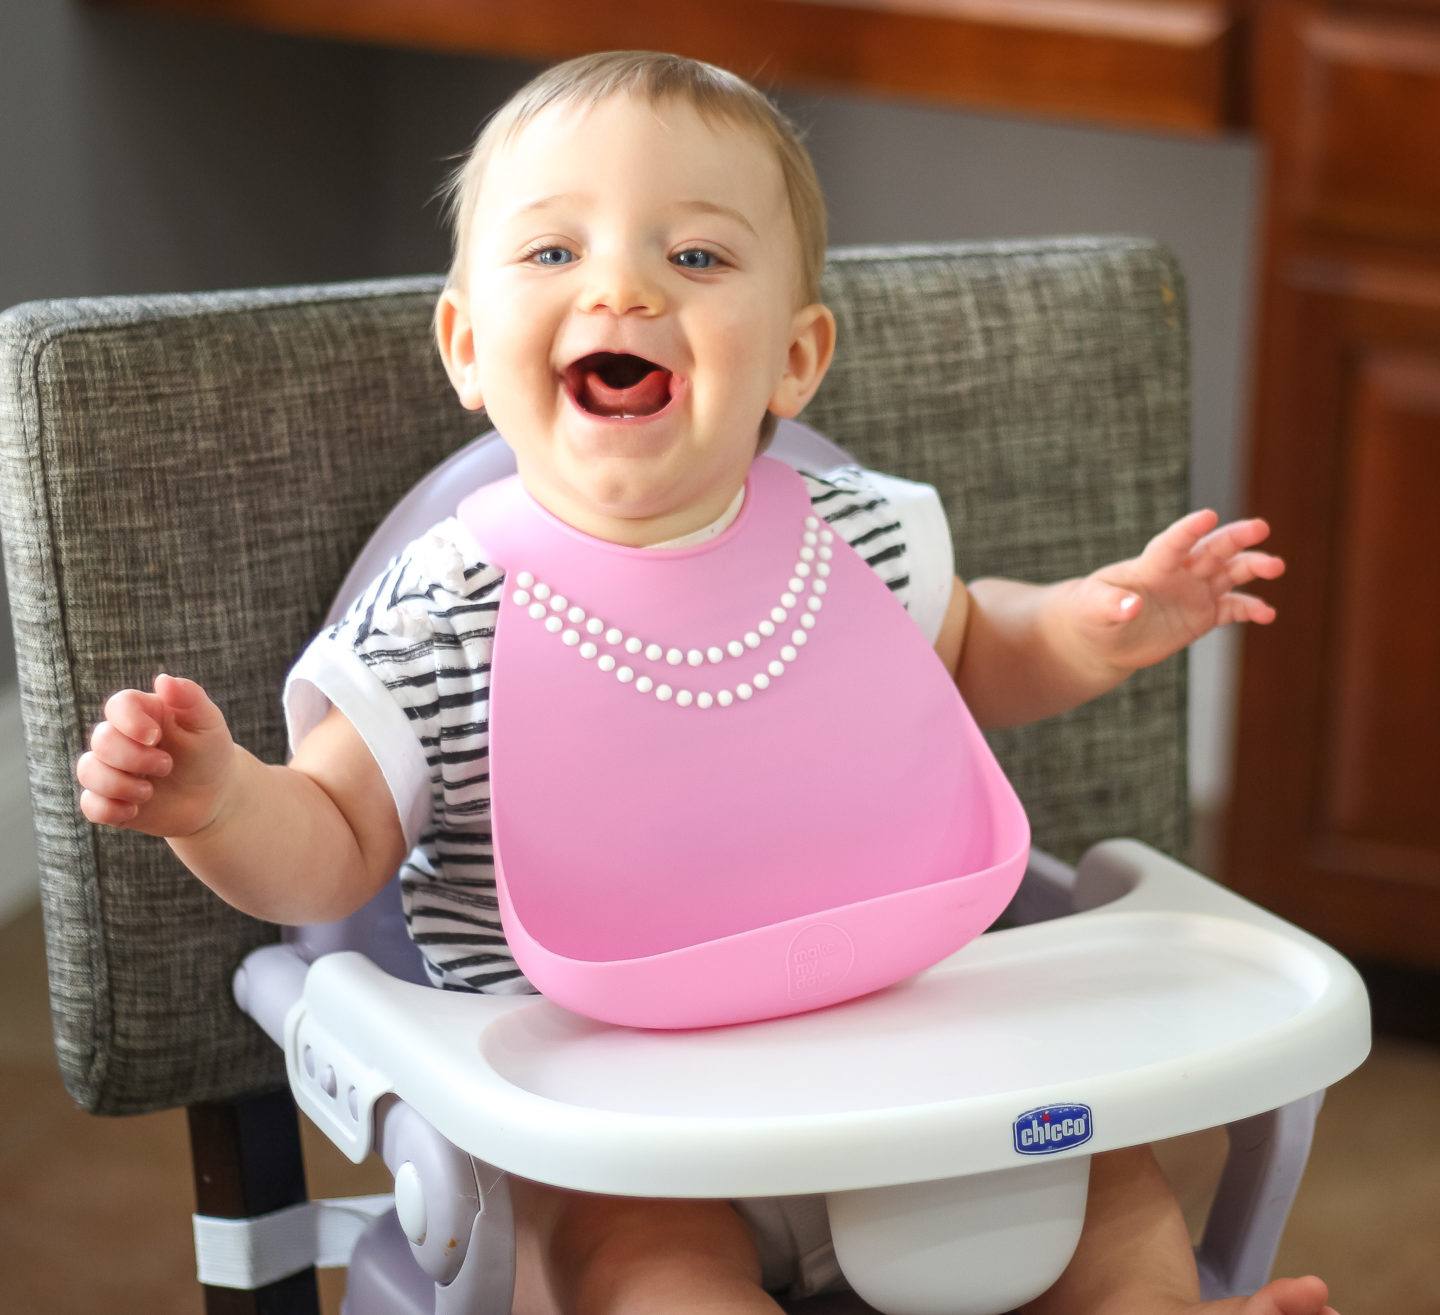 3 Easy Meal Ideas for 9-12 Month Old Babies